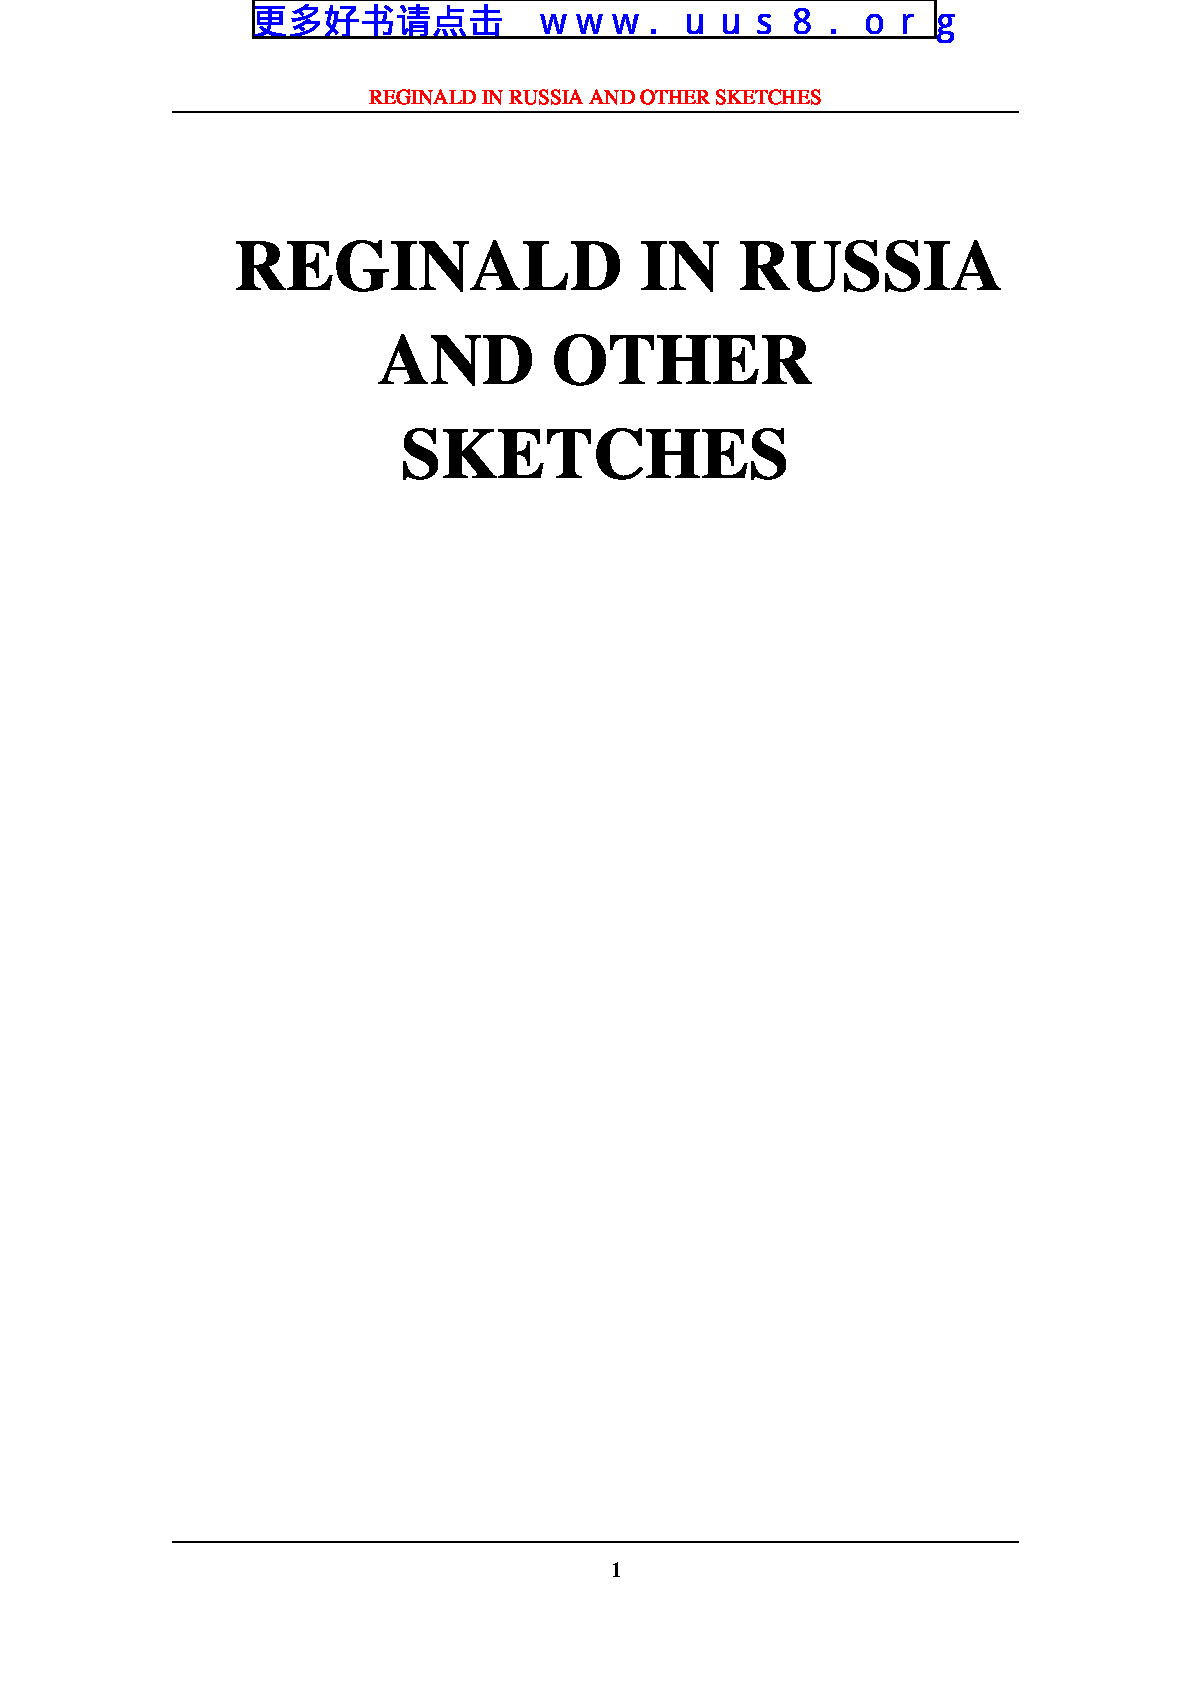 REGINALD_IN_RUSSIA_AND_OTHER_SKETCHES(里格那得在俄罗斯)